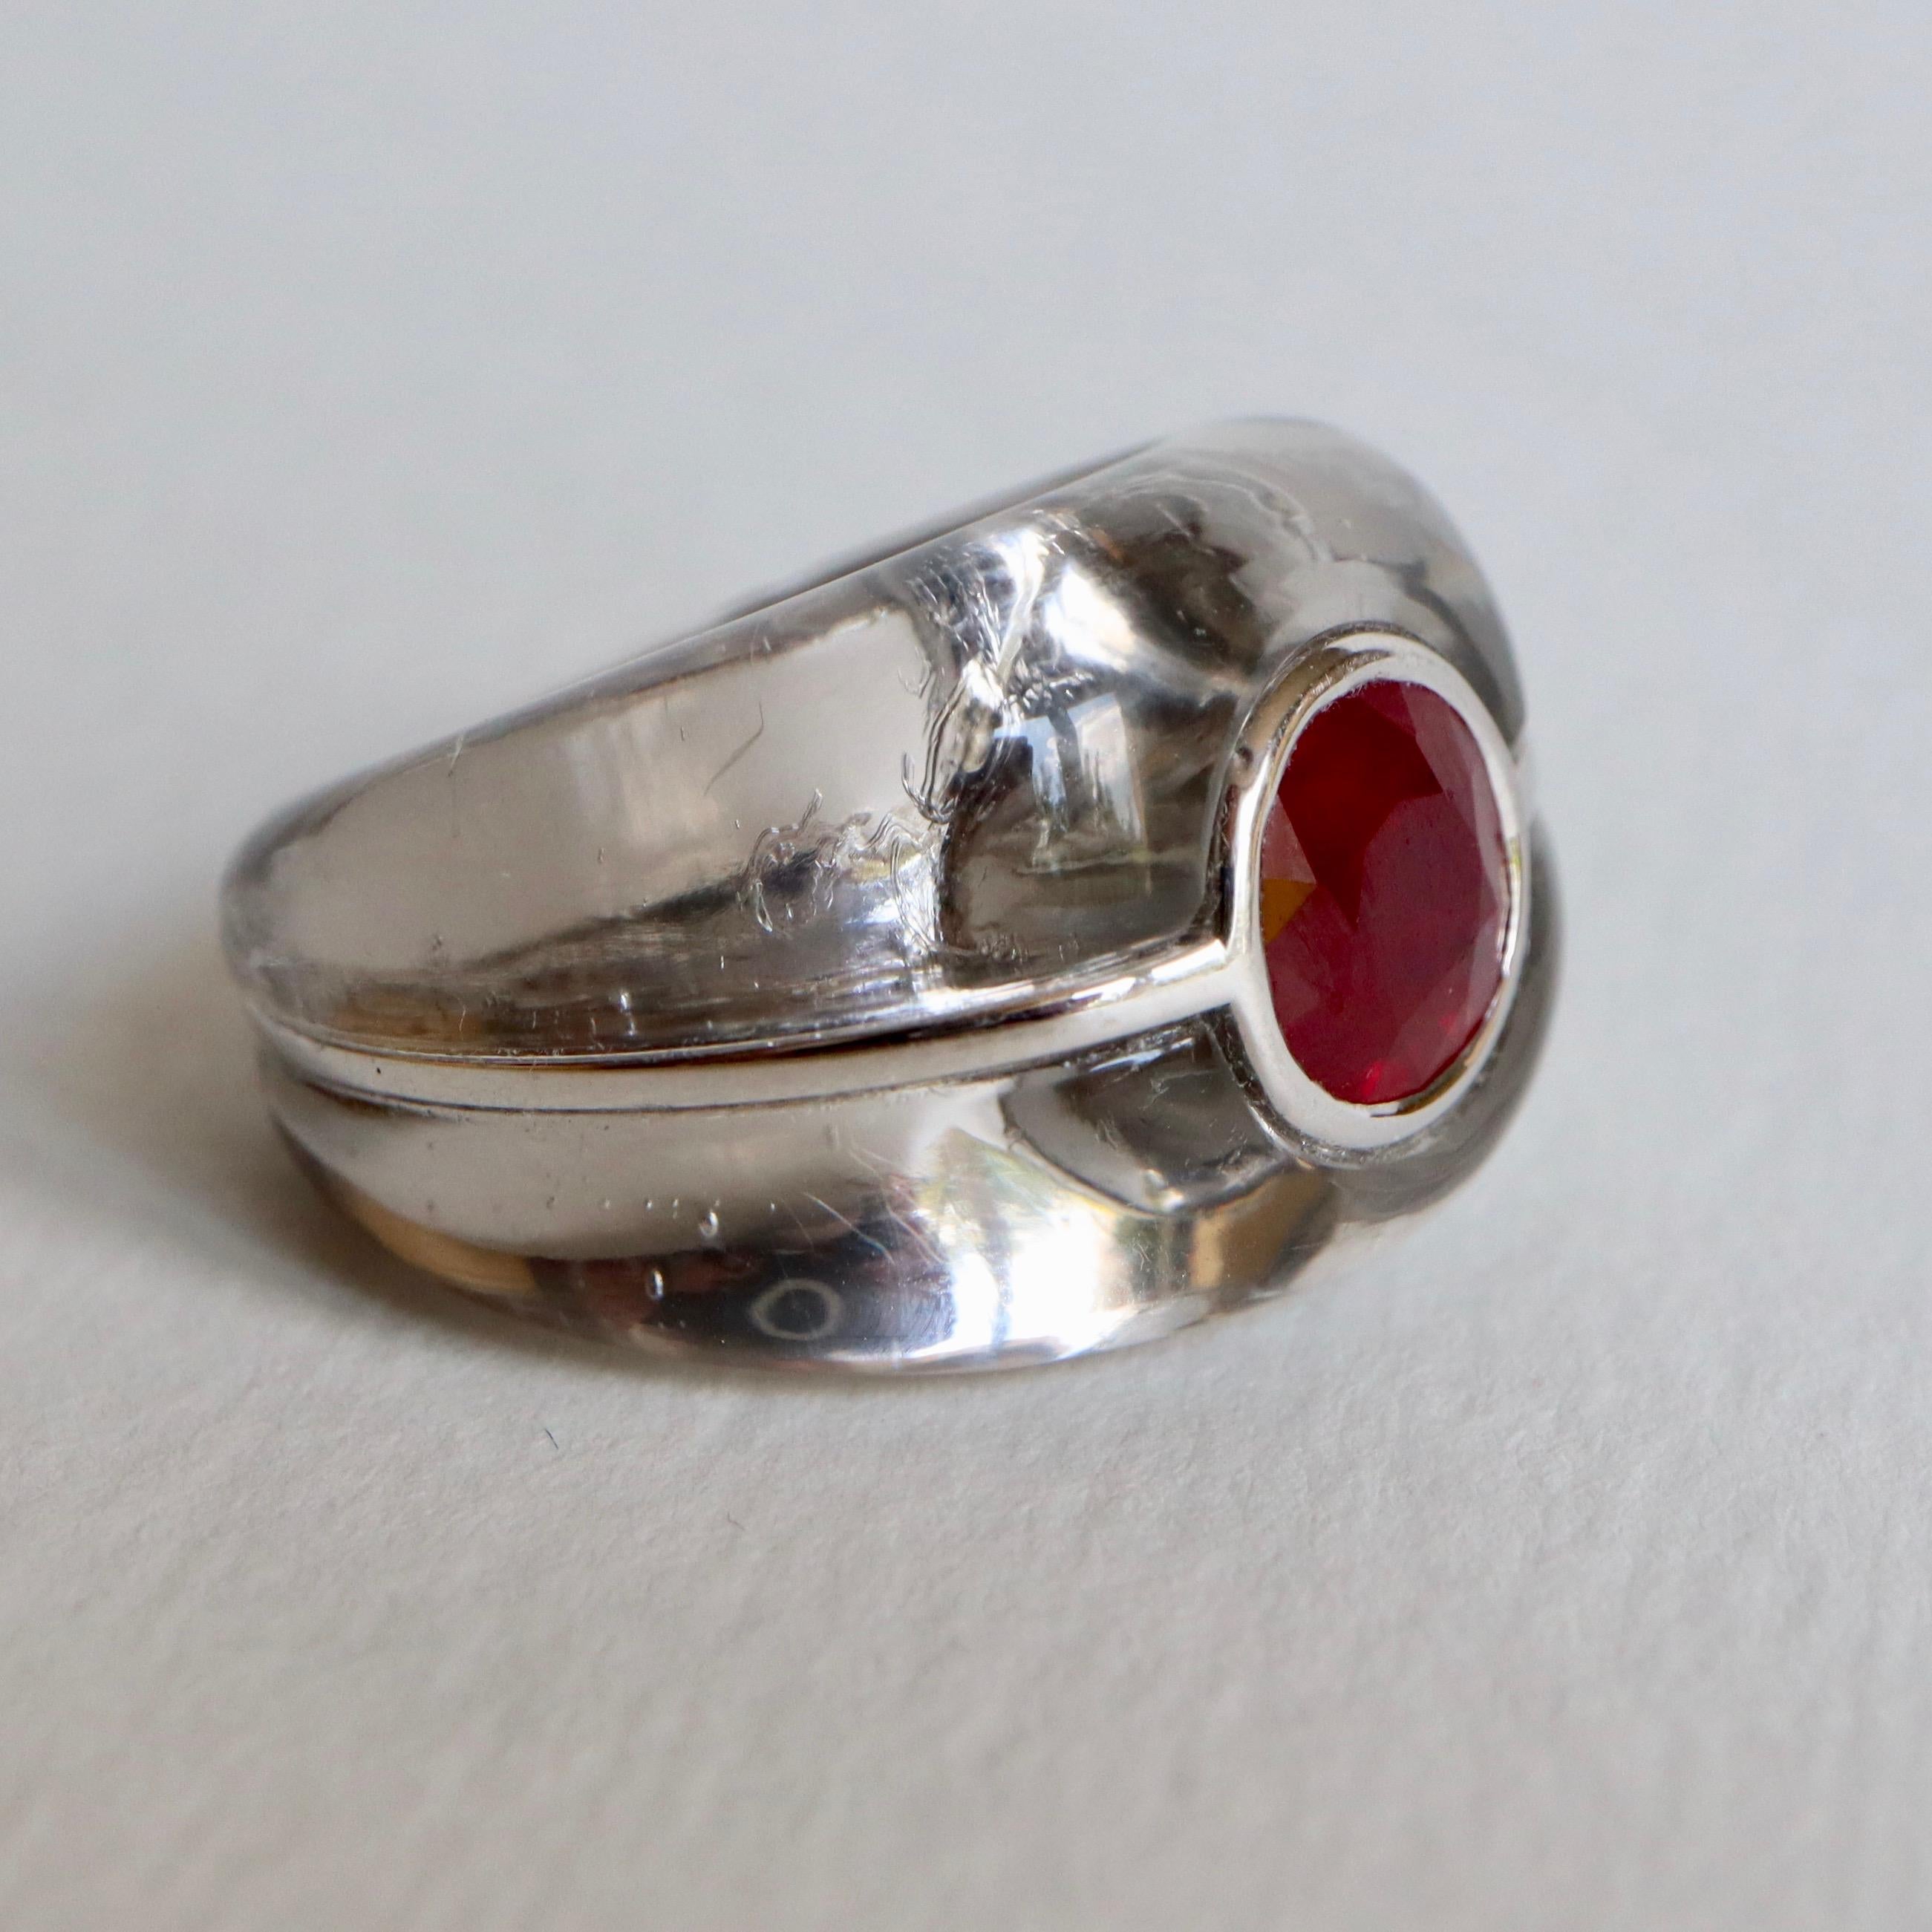 
MAUBOUSSIN Ring in Rock Crystal and 18 Carat White Gold and Ruby
Ruby Weight: approximately 3 Carats, Diameter 8.5 mm
GEM Paris Certificate: n ° 5A Burmese Ruby ​​heated Vitreous Filling
Signed MAUBOUSSIN PARIS and numbered
Diameter 16.5 Size 51 to